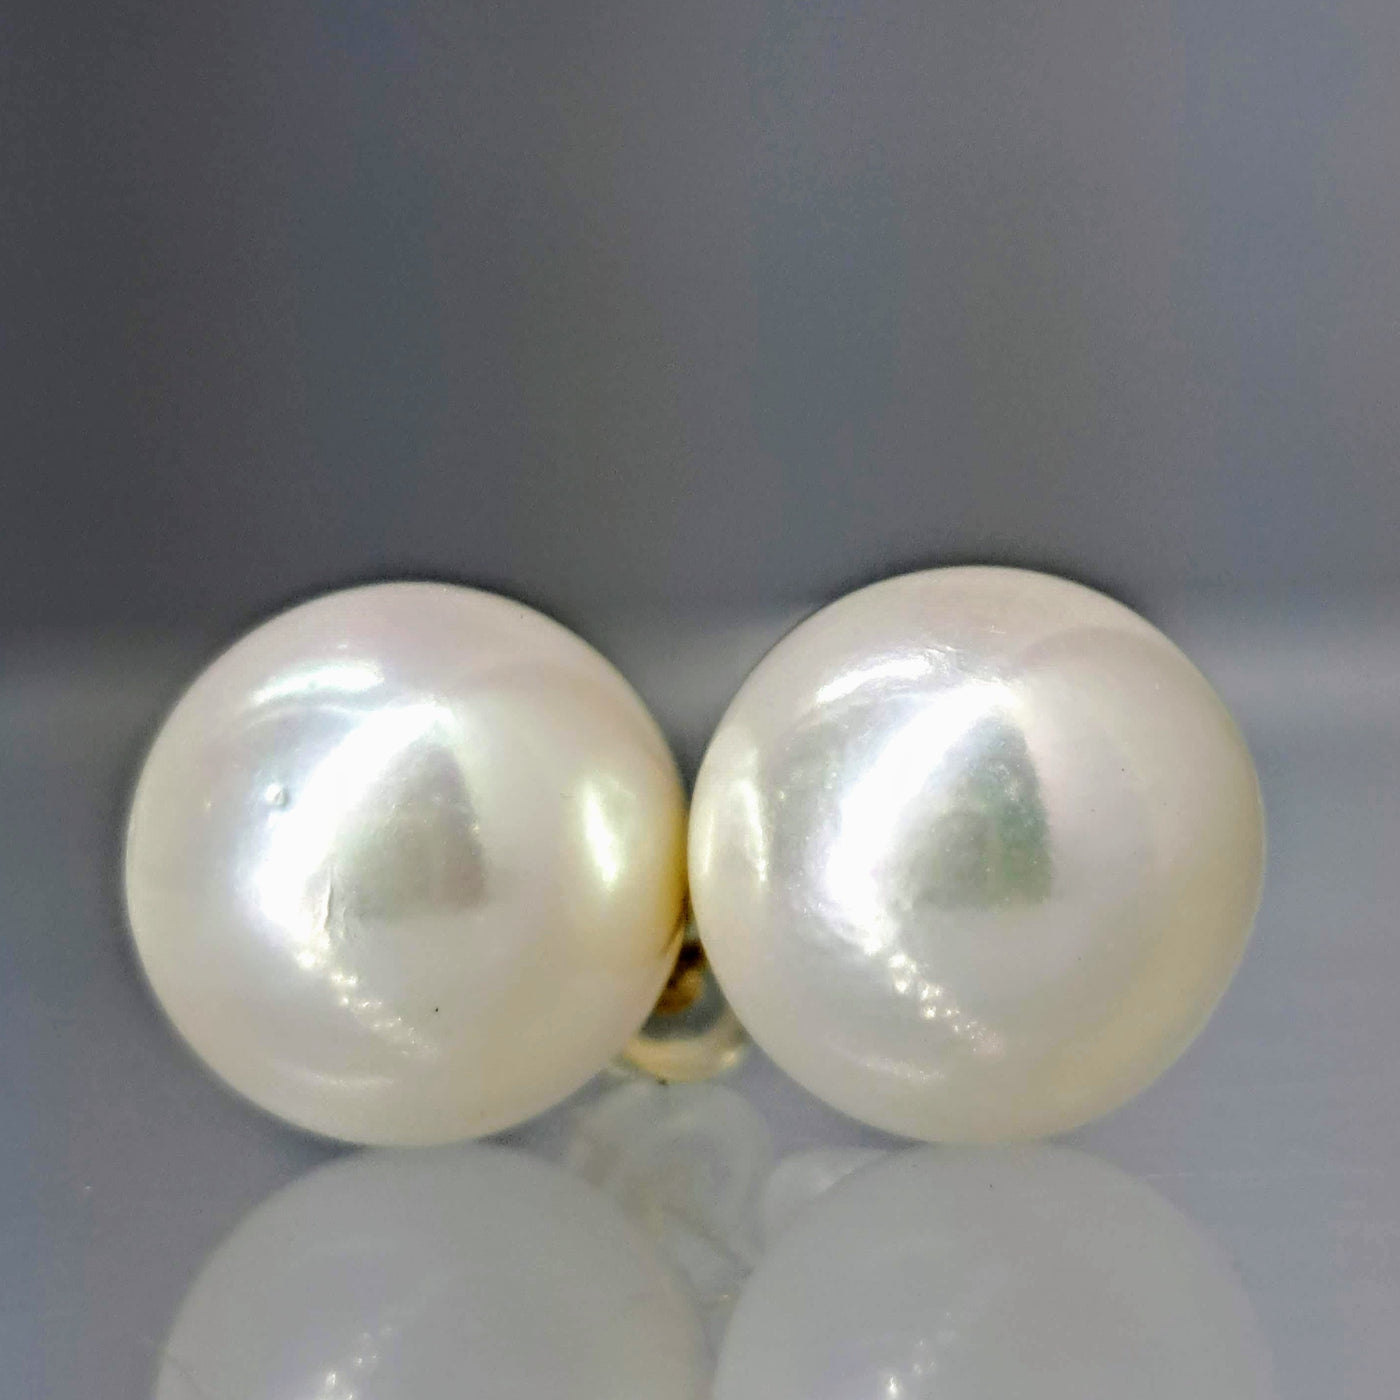 "Classic Pearl Studs" Earrings - South Sea Pearls, 14k Gold